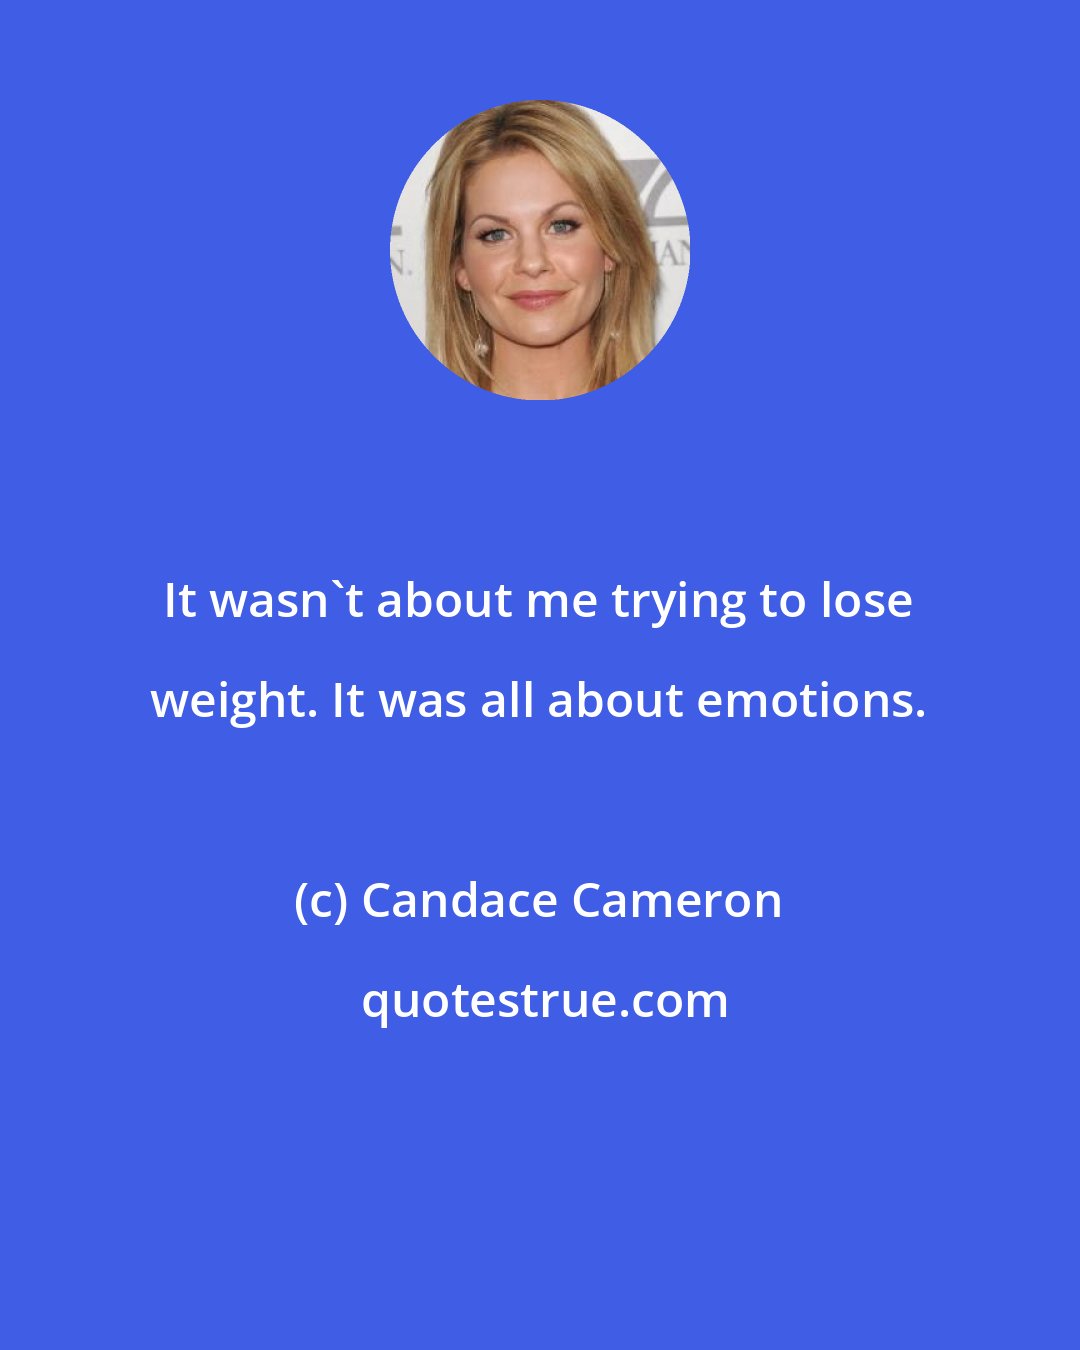 Candace Cameron: It wasn't about me trying to lose weight. It was all about emotions.